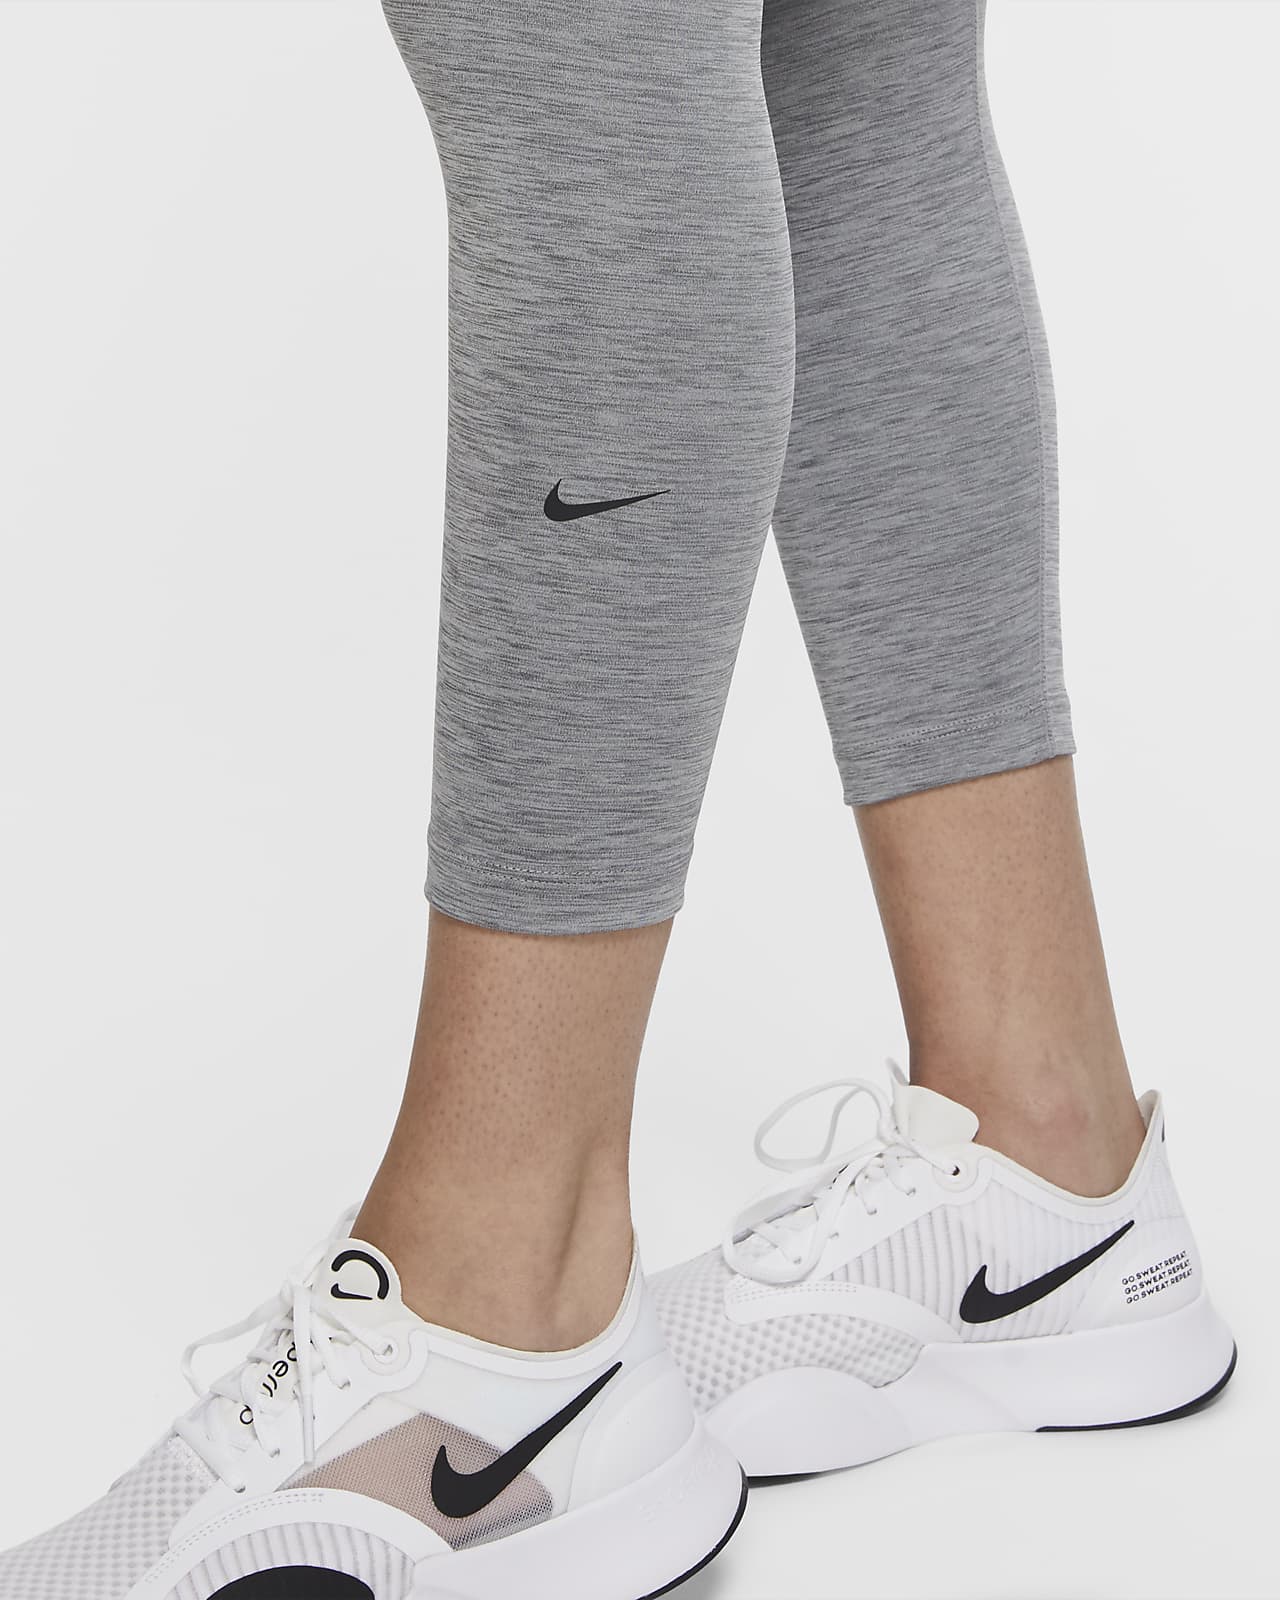 nike one mid rise crop